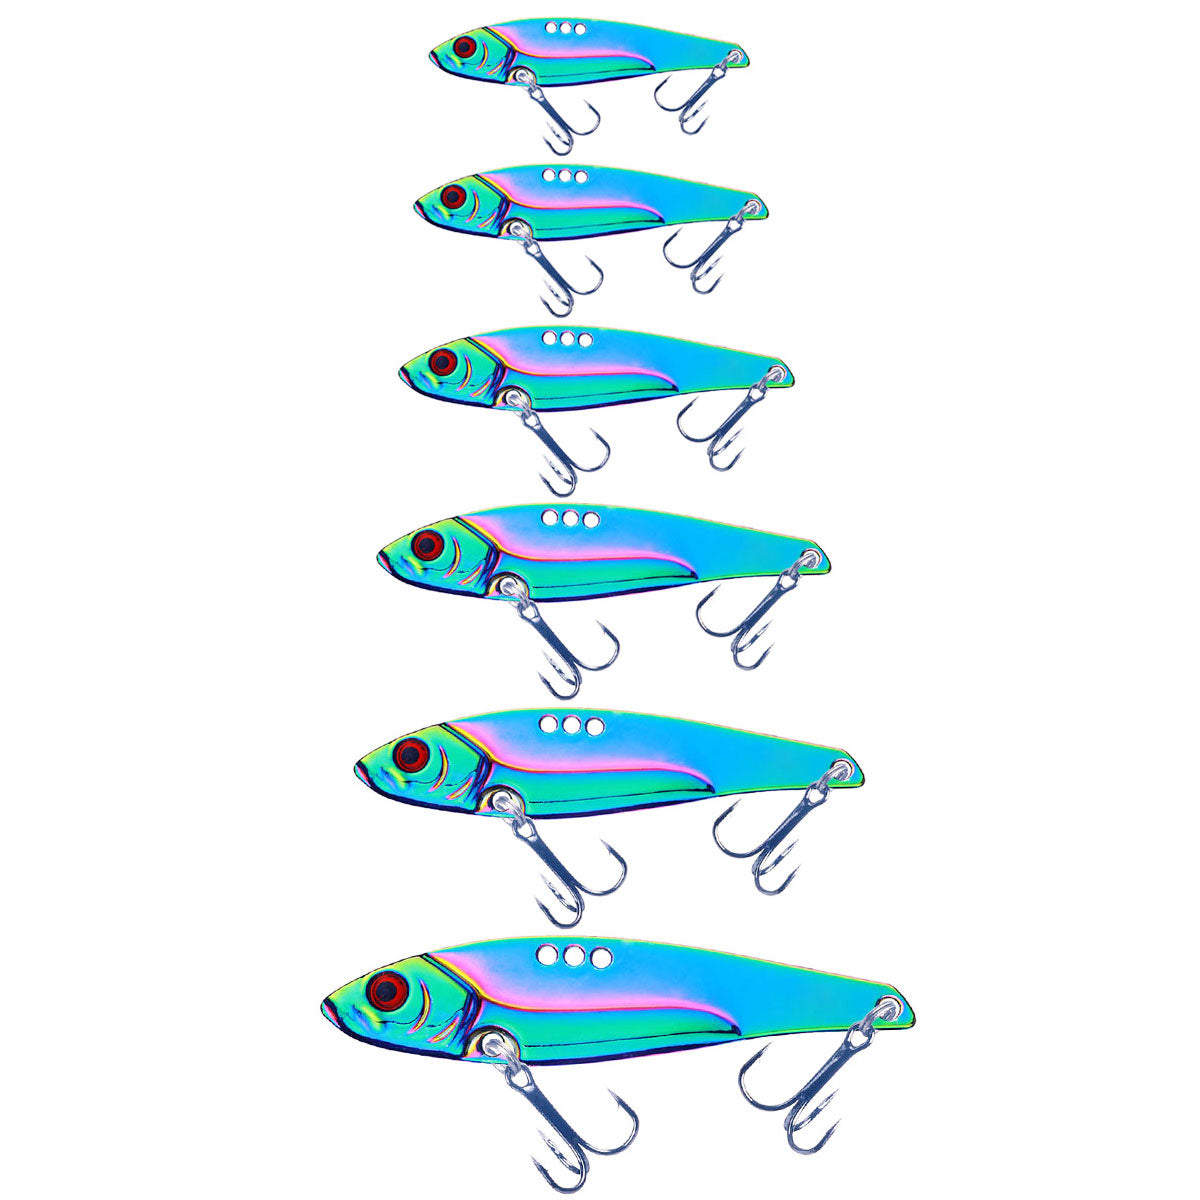 HENGJIA 11G Hard Bait 3d Printed Fishing Lures Blade For Freshwater Bass,  Walleye, Crappie, And Minnow Metal VIB017 Tackle From Windlg, $60.21